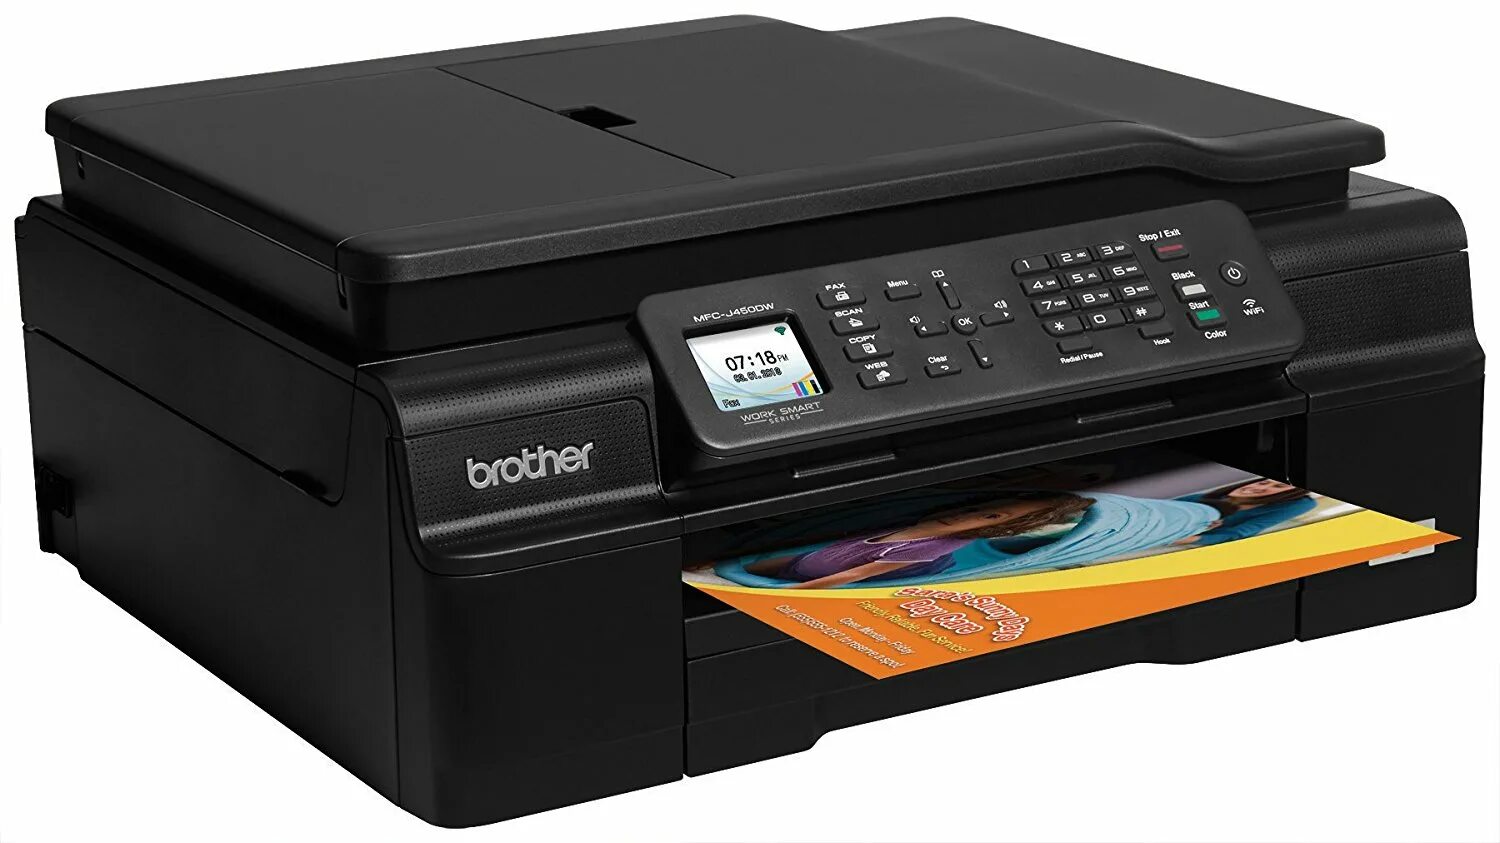 Brother print. МФУ brother MFC-j825dw. Brother MFC-7820nr. МФУ brother MFC-t4500dw. Лазерное МФУ brother MFC-l6900dw.